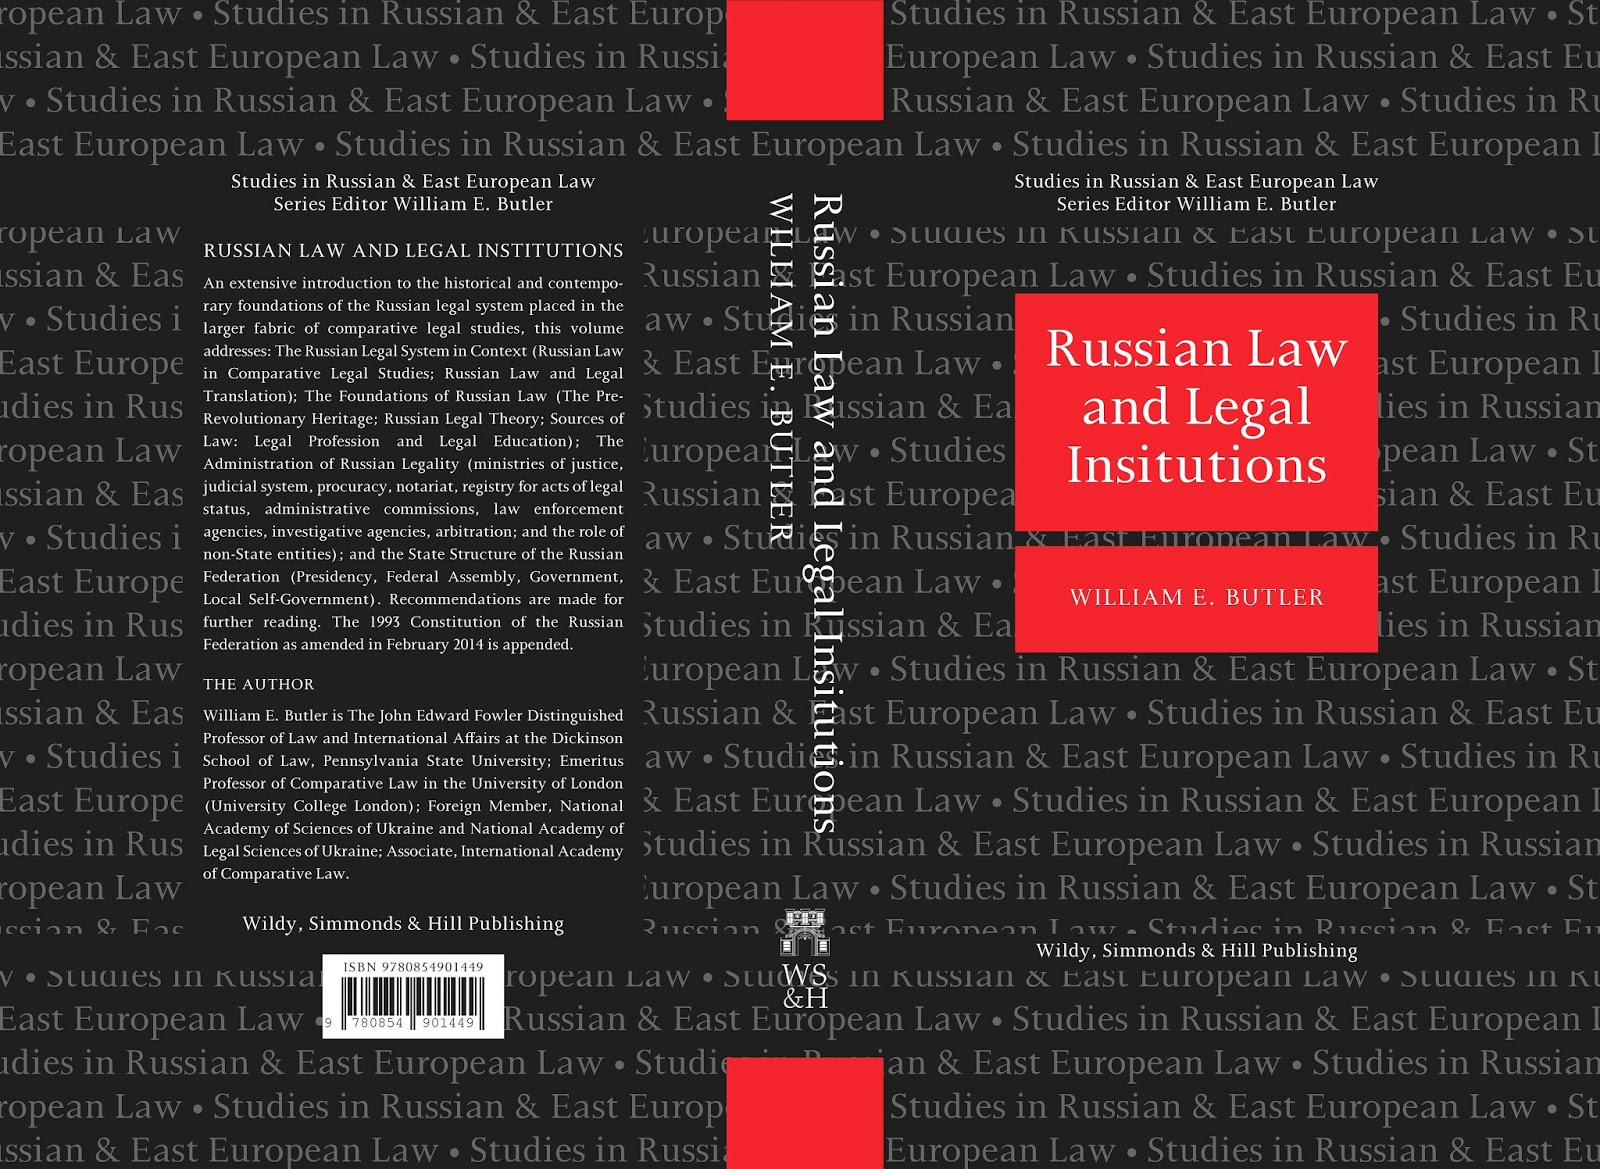 Books on Russian law